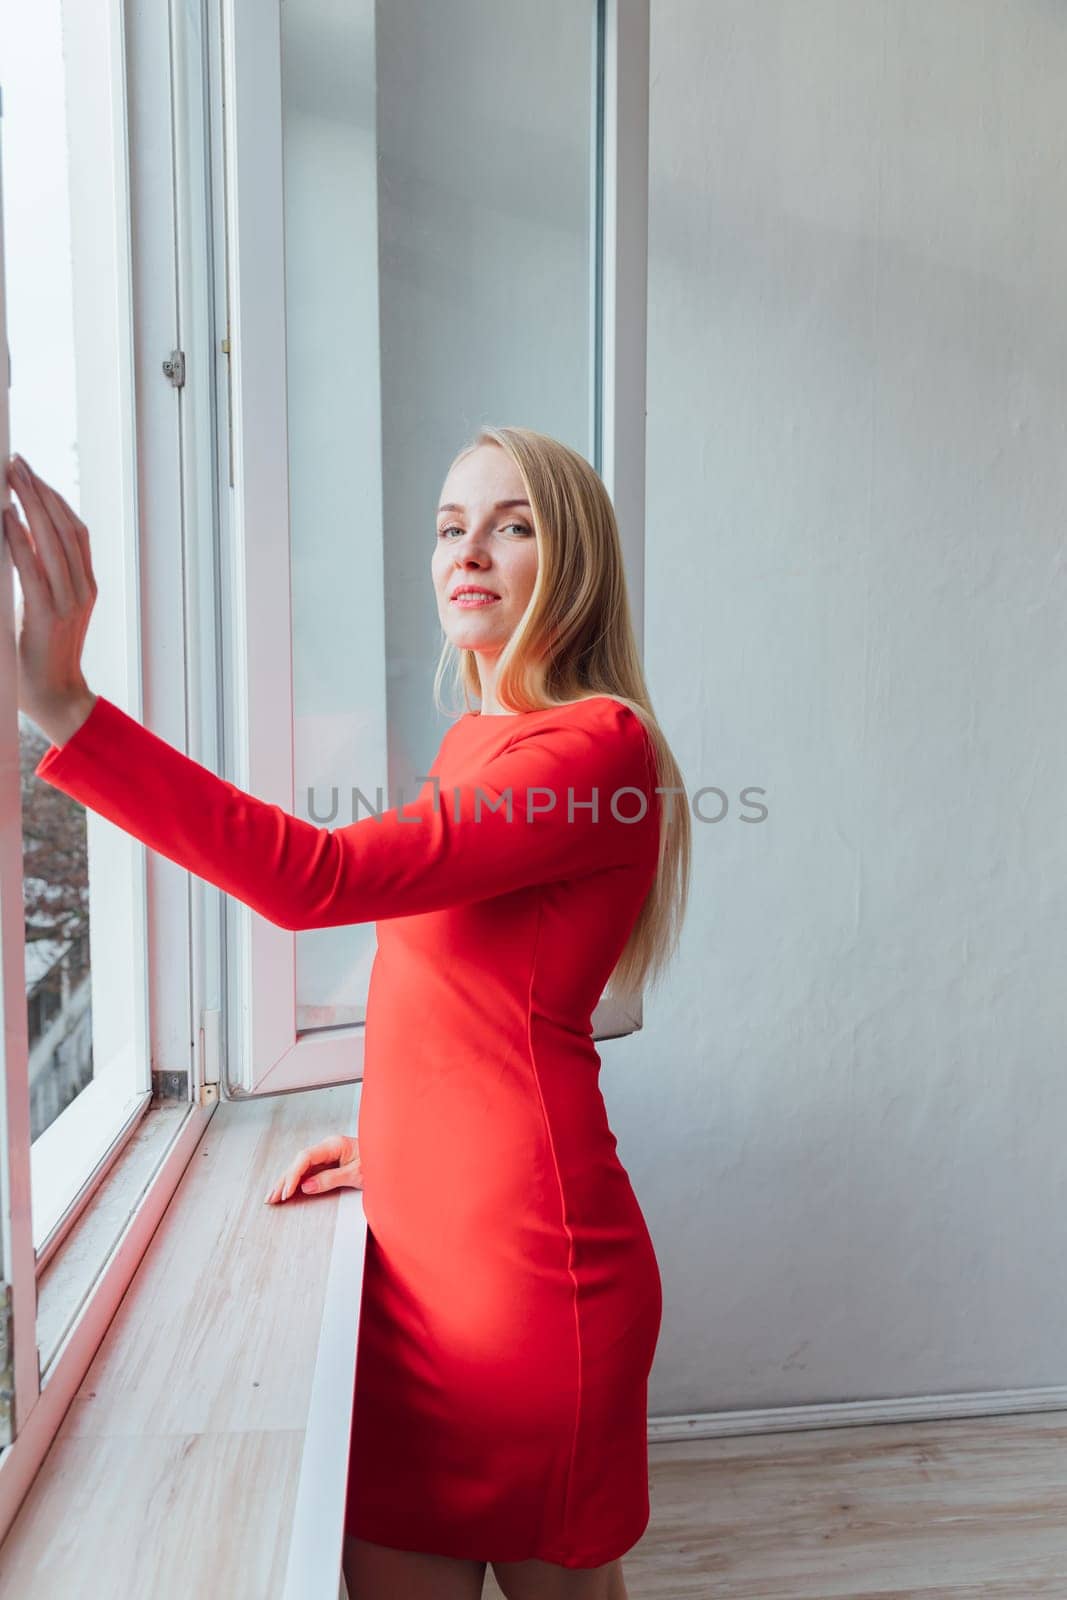 woman in a dress stands in a room by the window